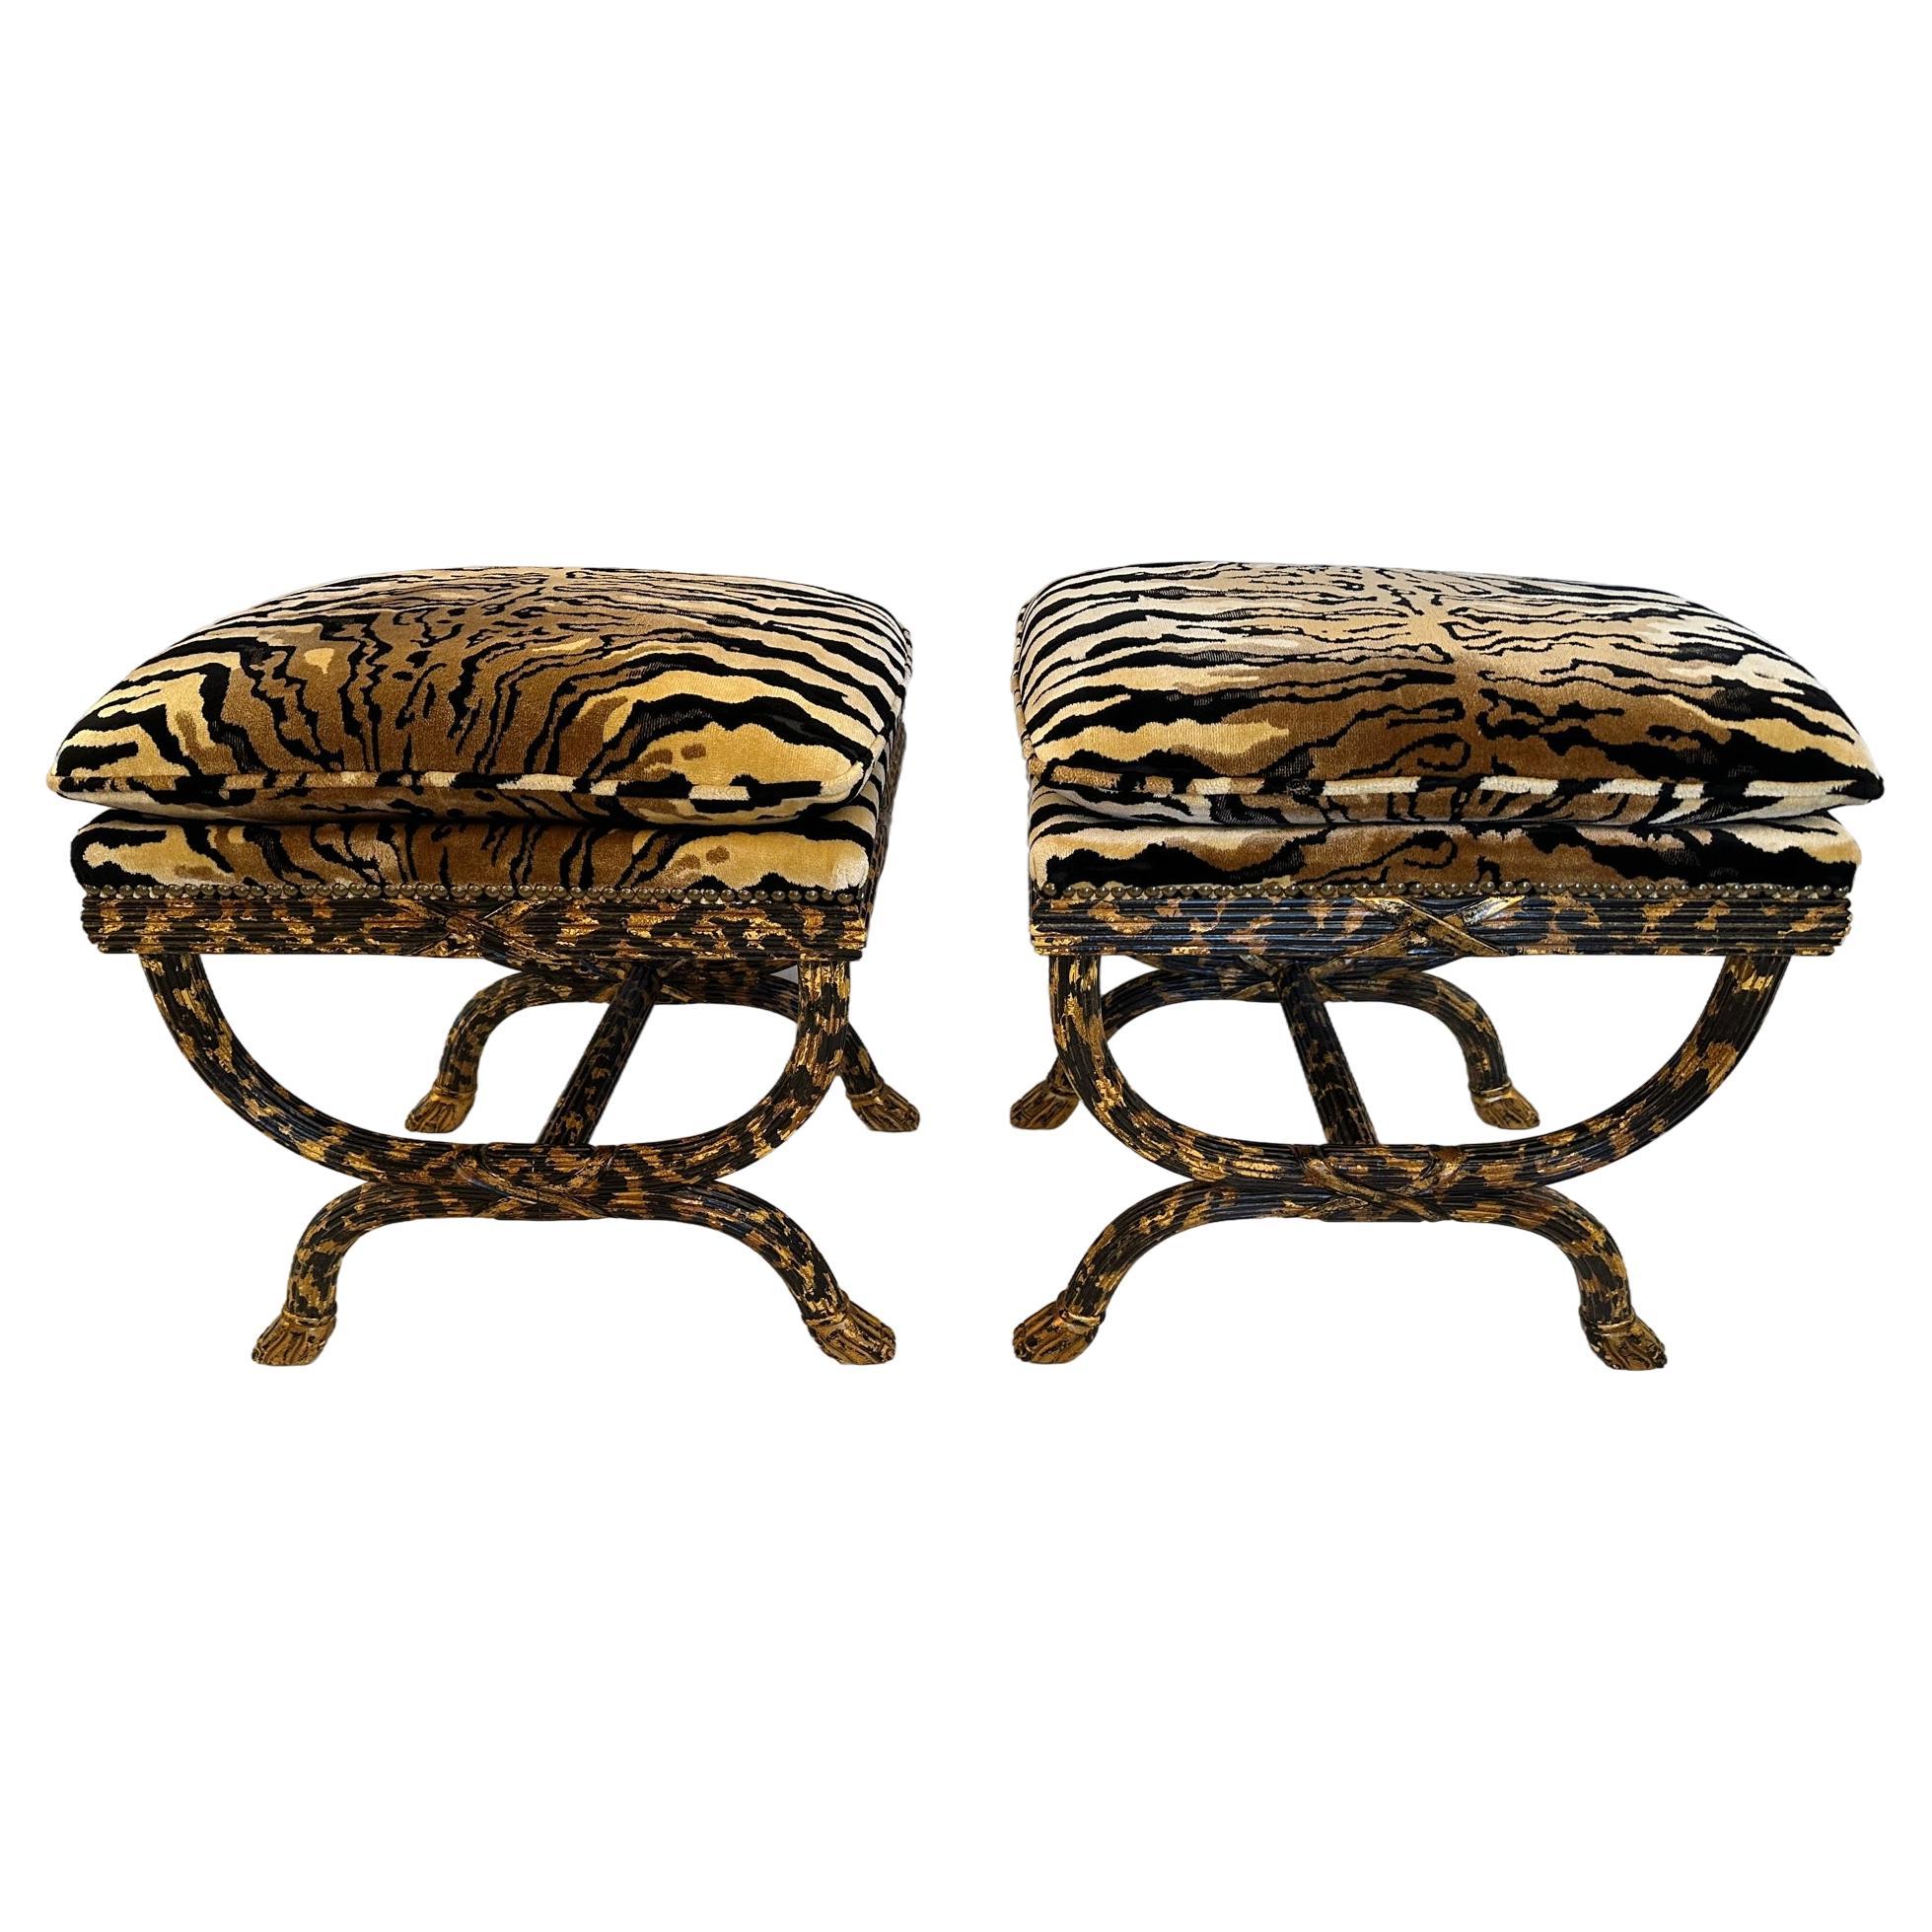 Amazing Glam Pair of Neoclassical Animal Print Ottomans by William Switzer